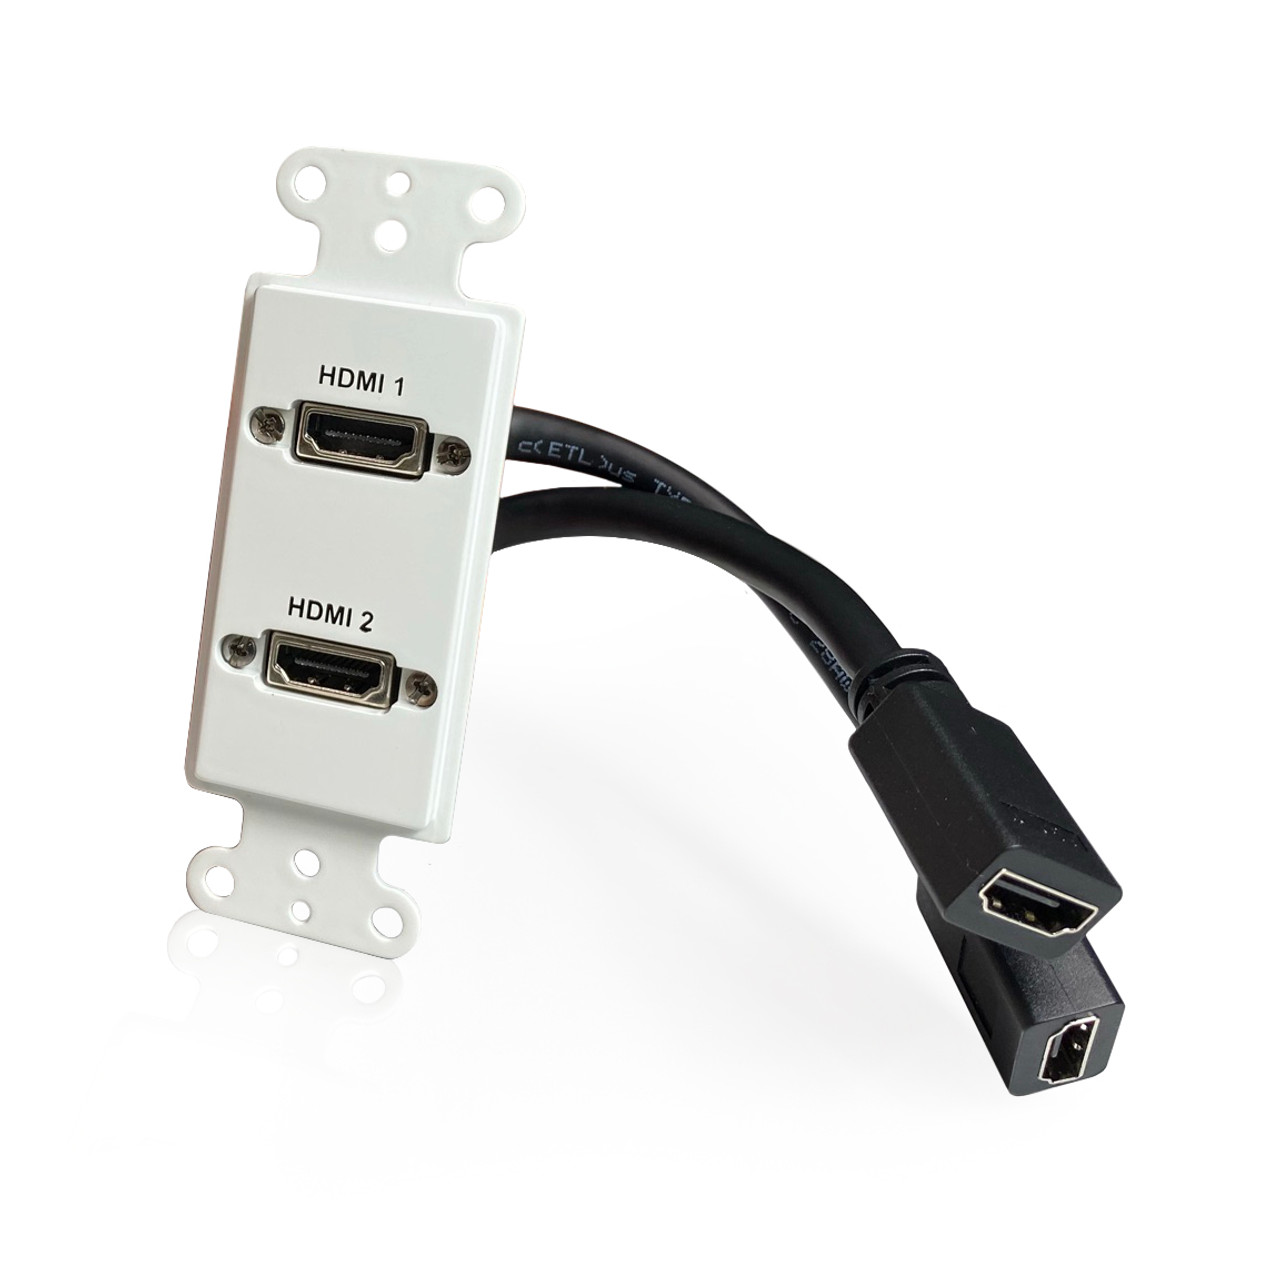 SF Cable, Dual Port HDMI White Wall Plate Kit 90 Degree Exit Ports